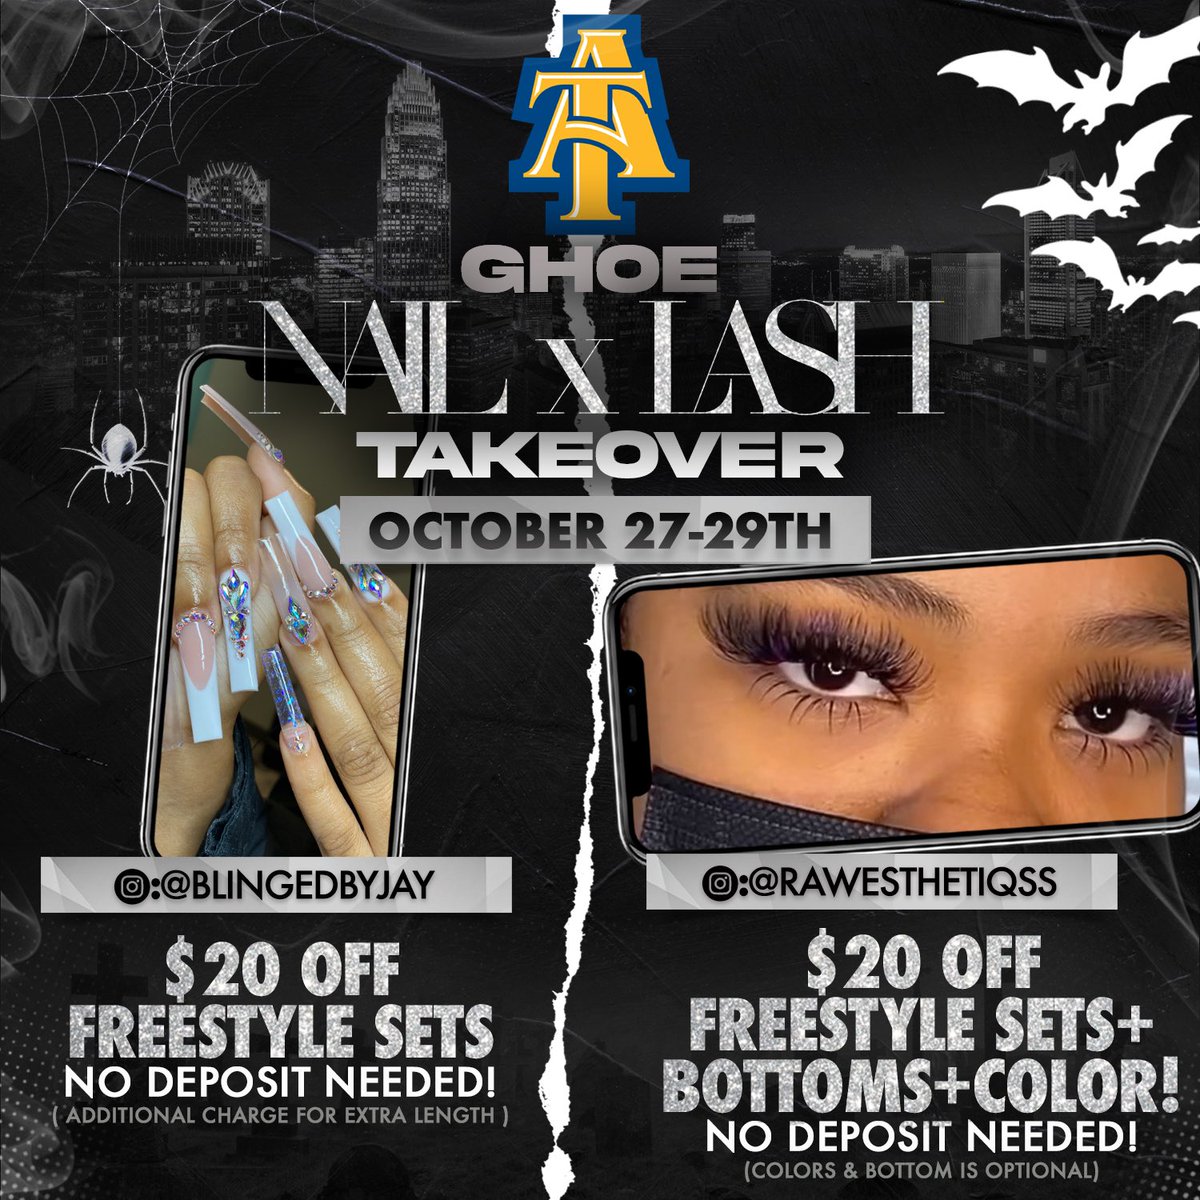 ITS HOMECOMING YALL🥳 & we’re taking over GHOE💛💙 
#ghoe #hoco21 #hbcu #ncat #uncg #wssu #Ghoetakeover #happyhalloween #lashes #nails #cltlashes #cltnails #charlottelashes #charlottenails #336lashtech #336nailtech #336lashes #336nails #highpointlashes #highpointnails #homecoming